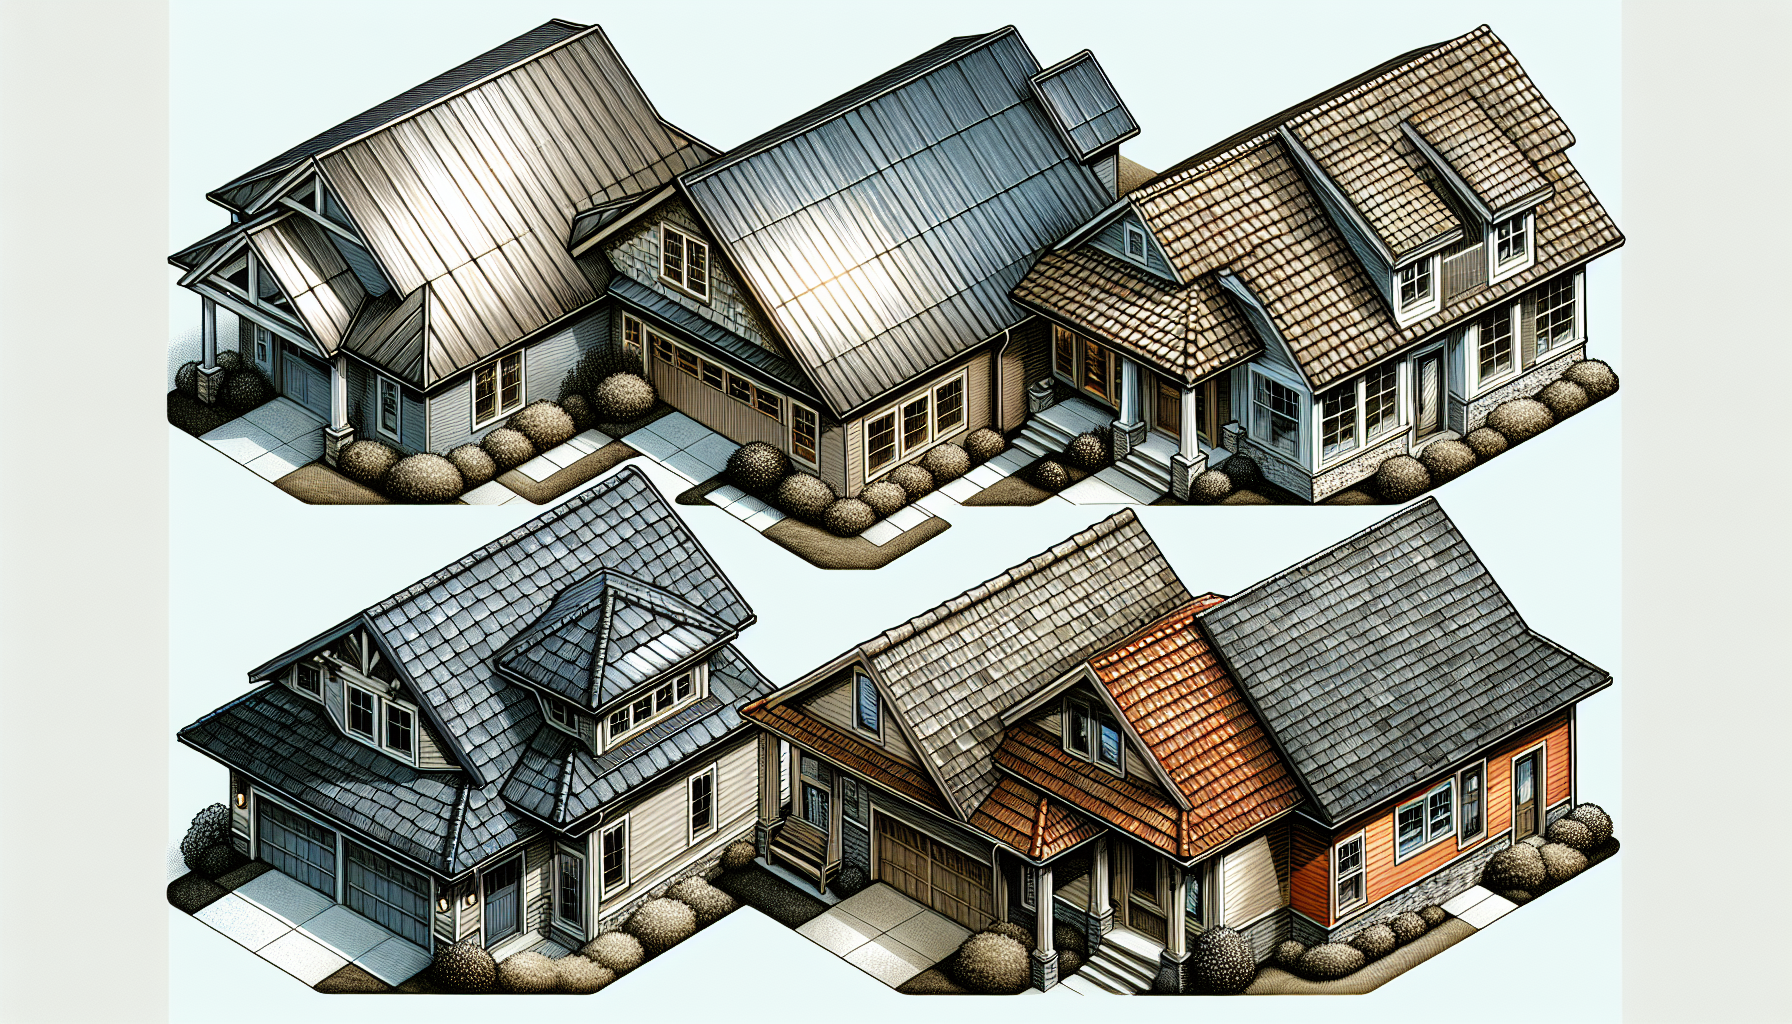 Illustration of different types of roofing materials